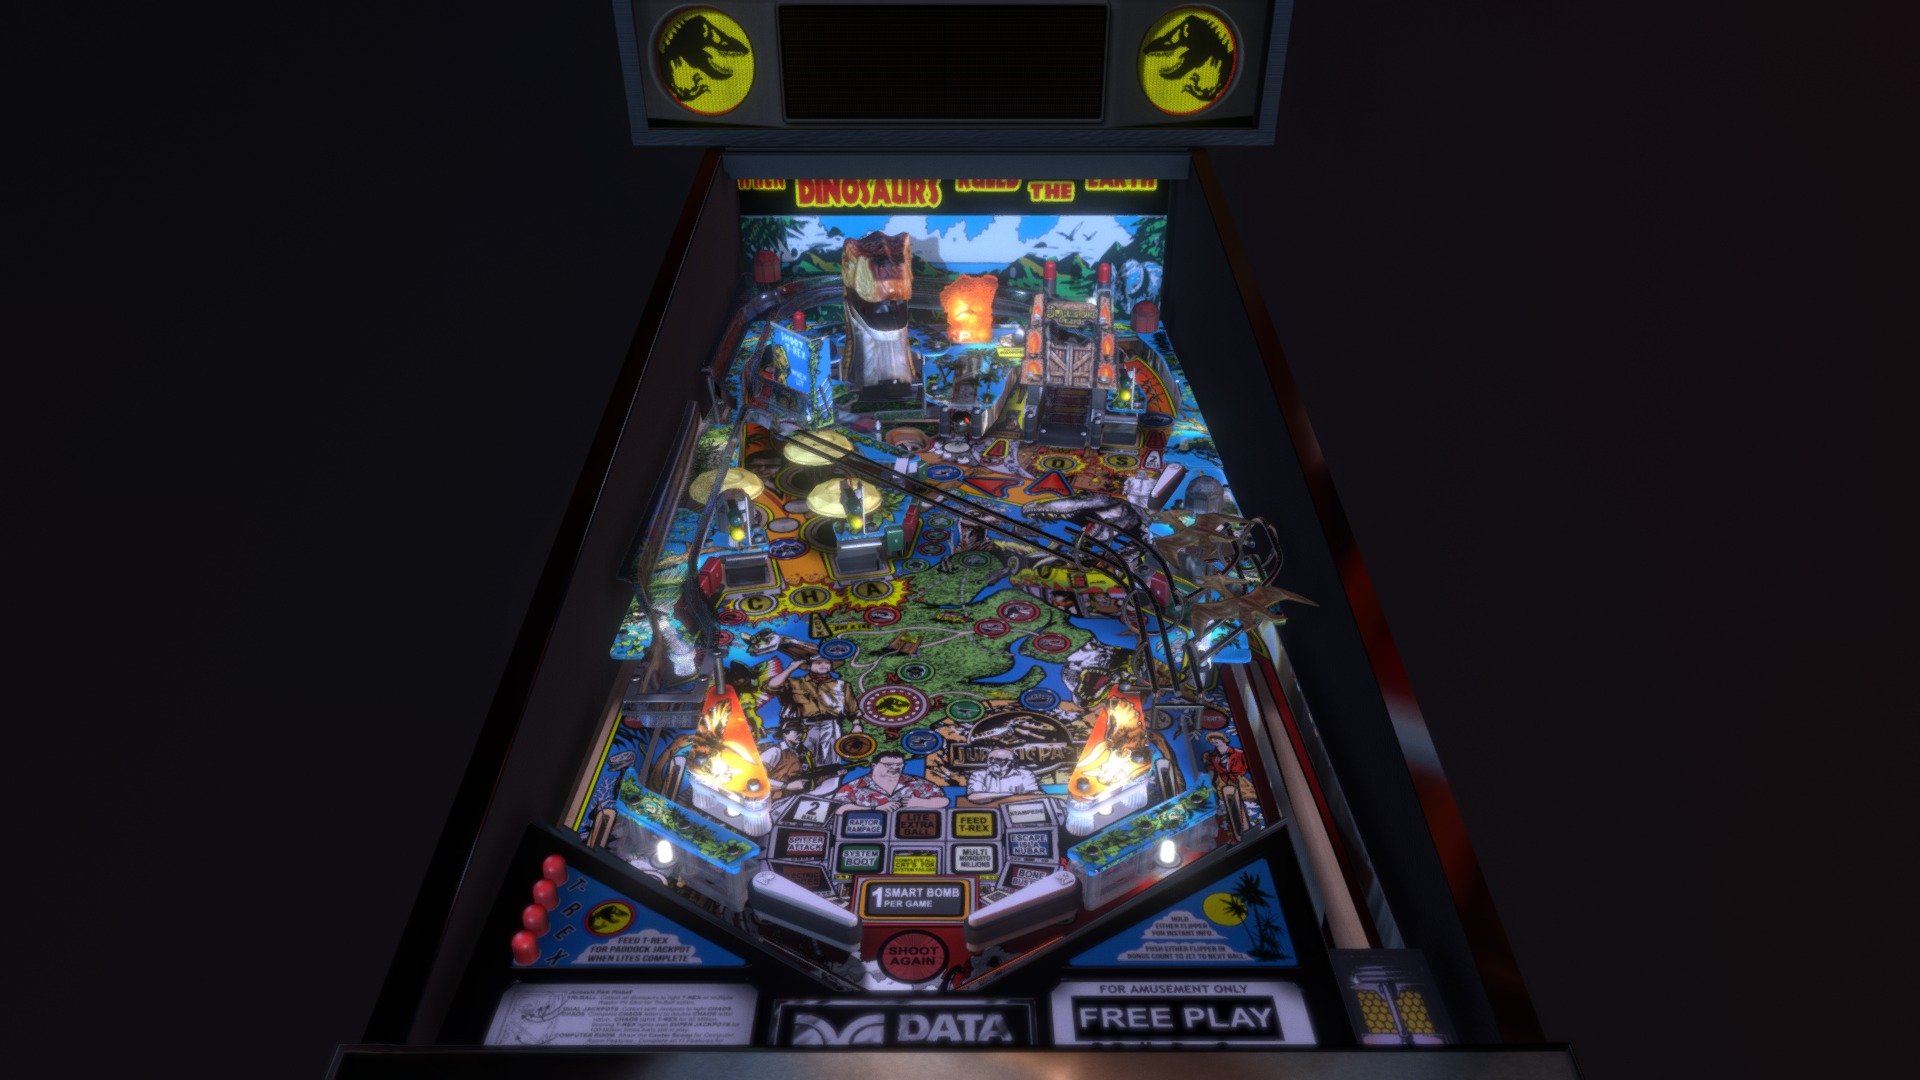 A Virtual Pinball recreation which can be downloaded from www.vpinball.com and played with visual pinball emulator.  You can also see my project posted there for how it was all made.  EDIT: This is no longer available for download since vpinball decided to shut down since too many scumbags were trying to make money off of the virtual pinball hobby community

Almost all of the artwork on the table was redrawn for this project, just about everything is in good HD quality so you can really zoom up on all the beautiful artwork!

Many aspects of the table utilise pre-rendered texture maps for added realism.

Much of the artwork for this table was redrawn in high resolution, I've made this model available for purchase but be aware that if you are buying it, the artwork and IP's are property of their respective owners and you are purchasing it for entertainment purposes only 3d model